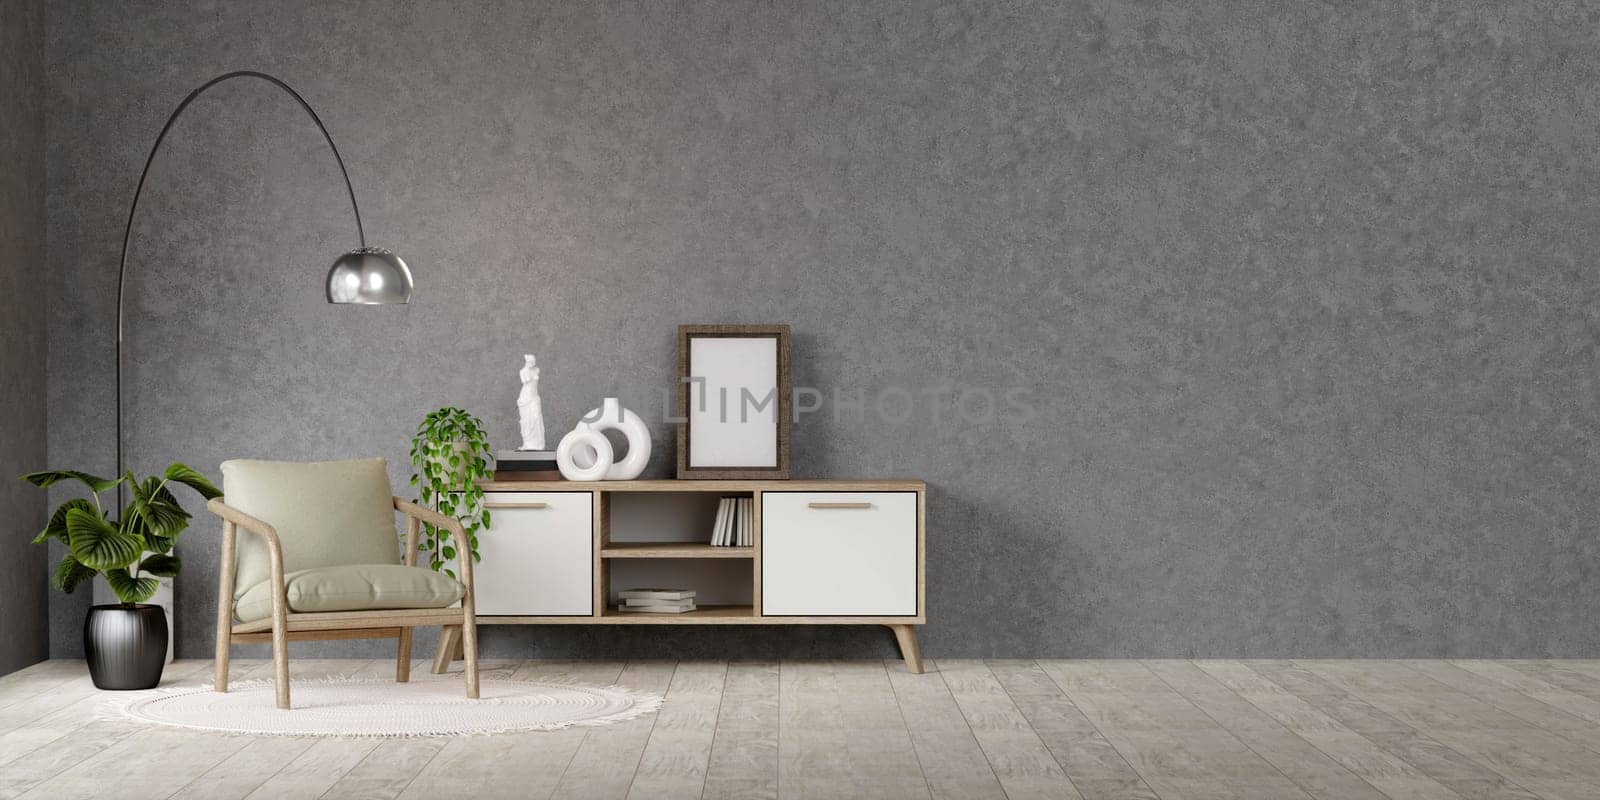 Wooden rustic cabinet near wall with blank poster frame with copy space. Interior design of modern living room. 3D render illustration.